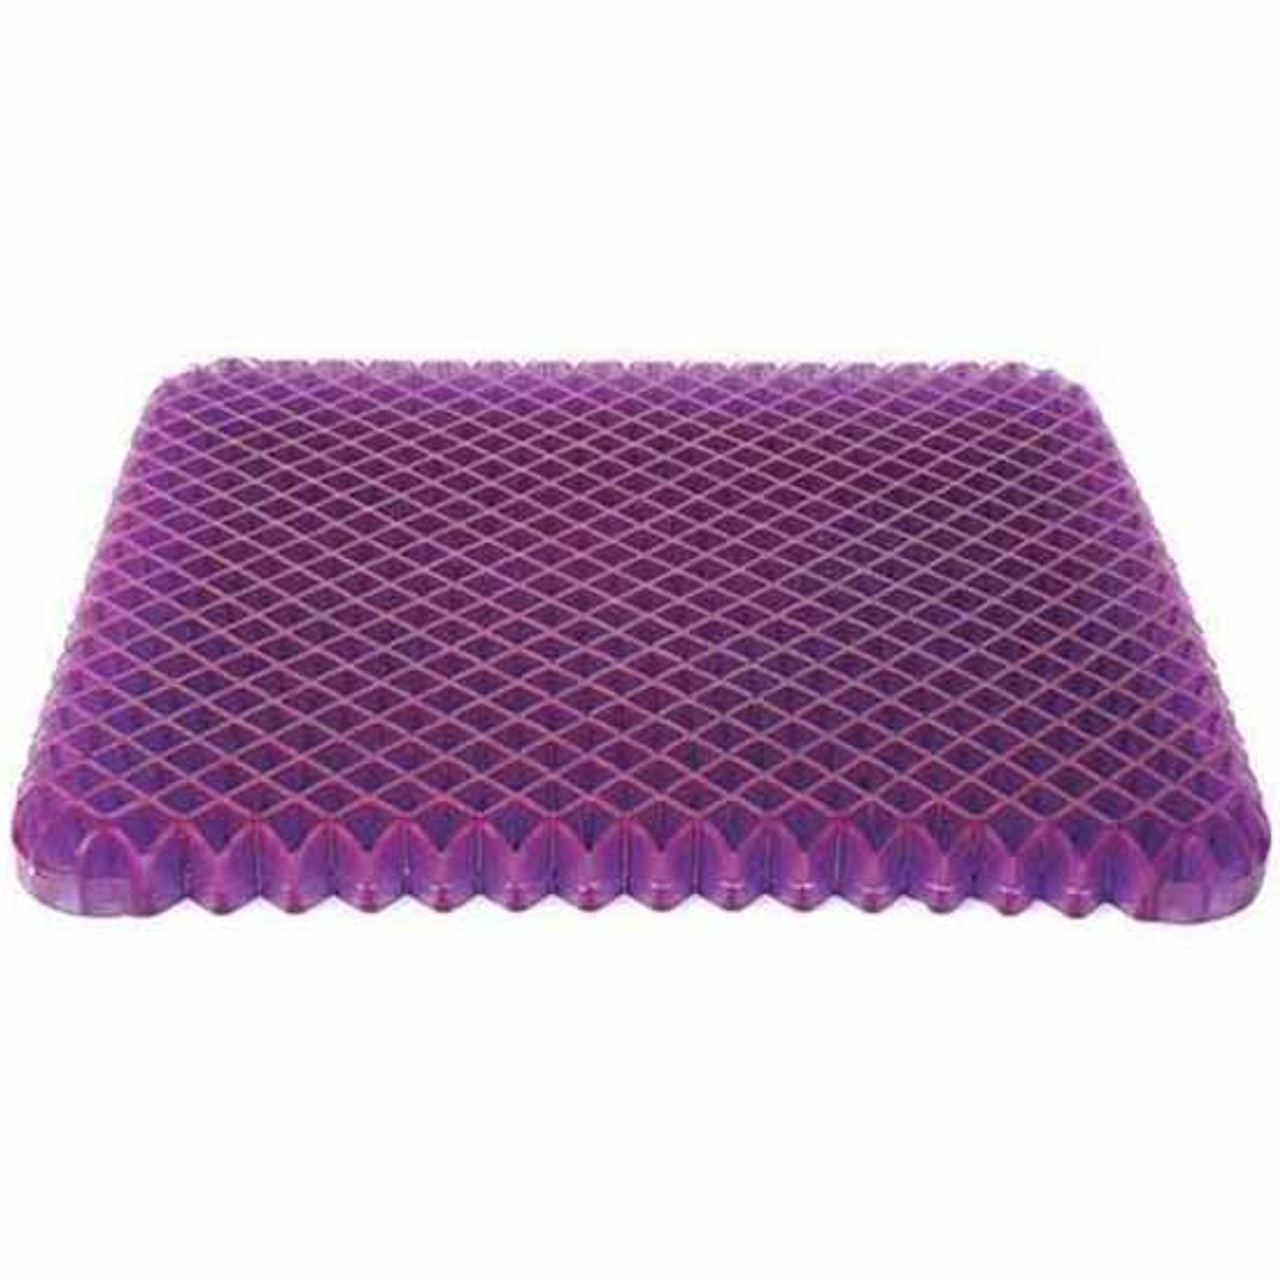 Purple Gel Original Low-Profile Seat Cushion With Washable Black Cover -  17.25 X 15.25 X 1.25 Inch - 4 State Trucks